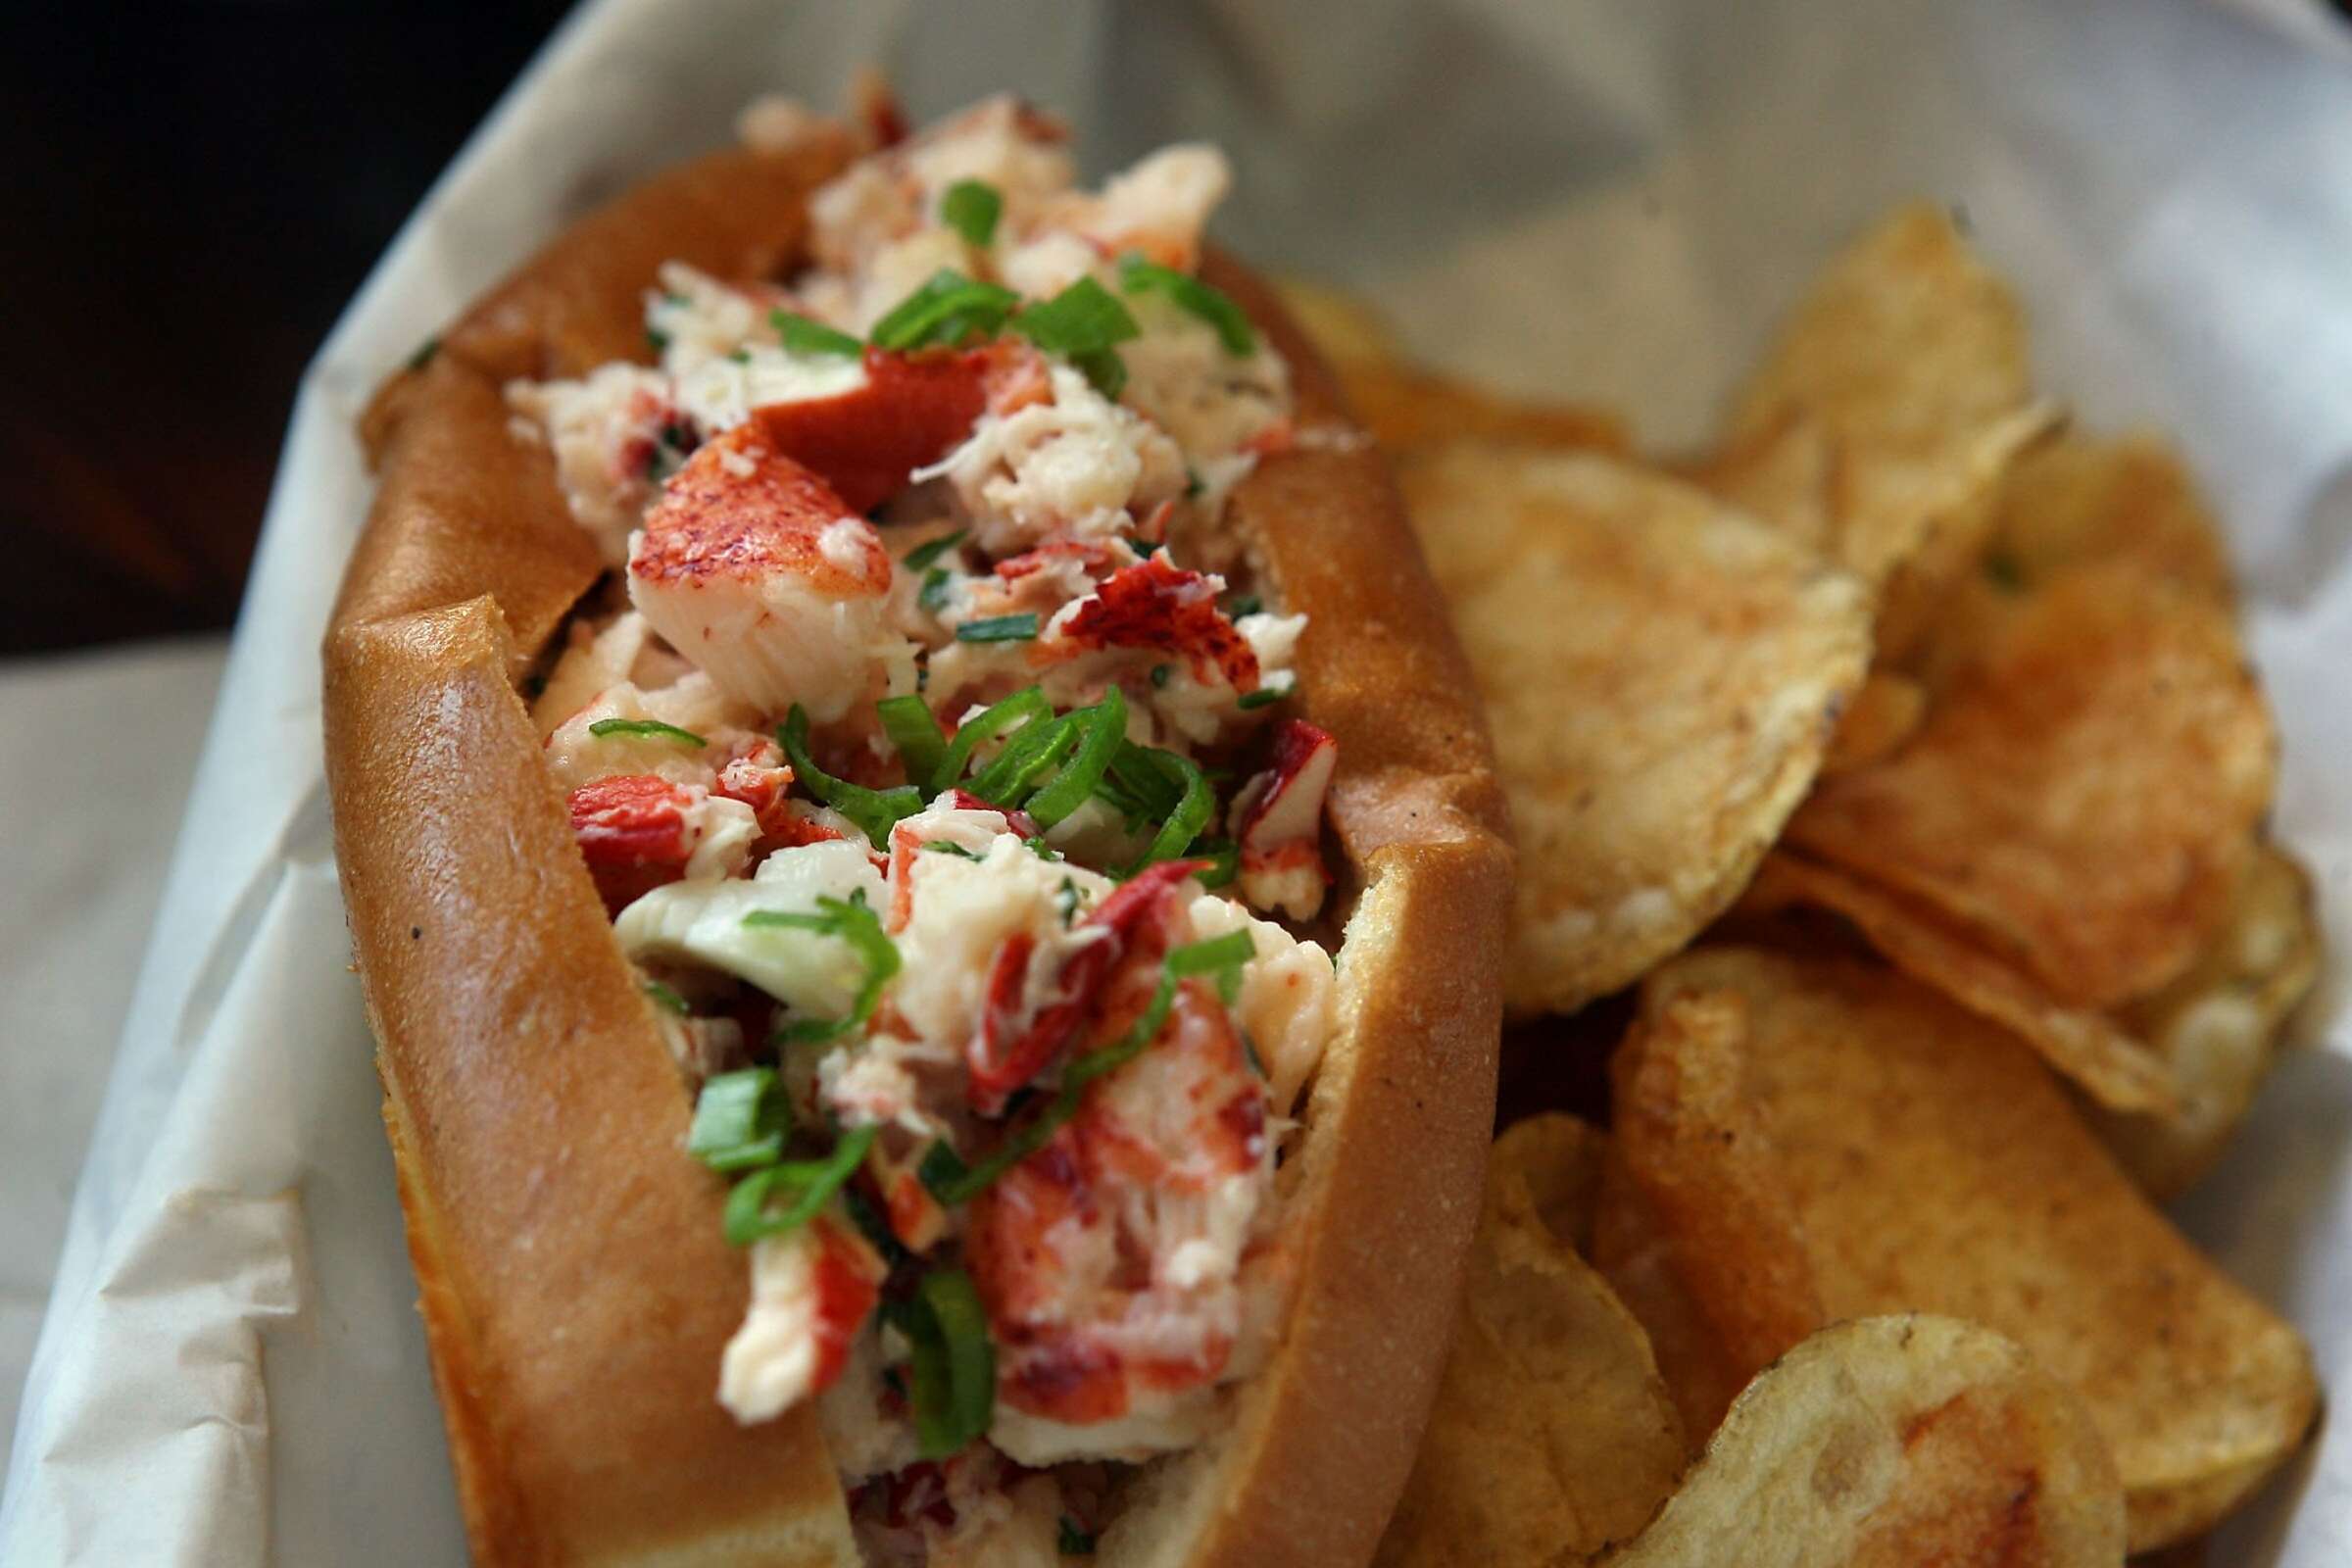 CT's lobster roll spots are open for the 2021 season